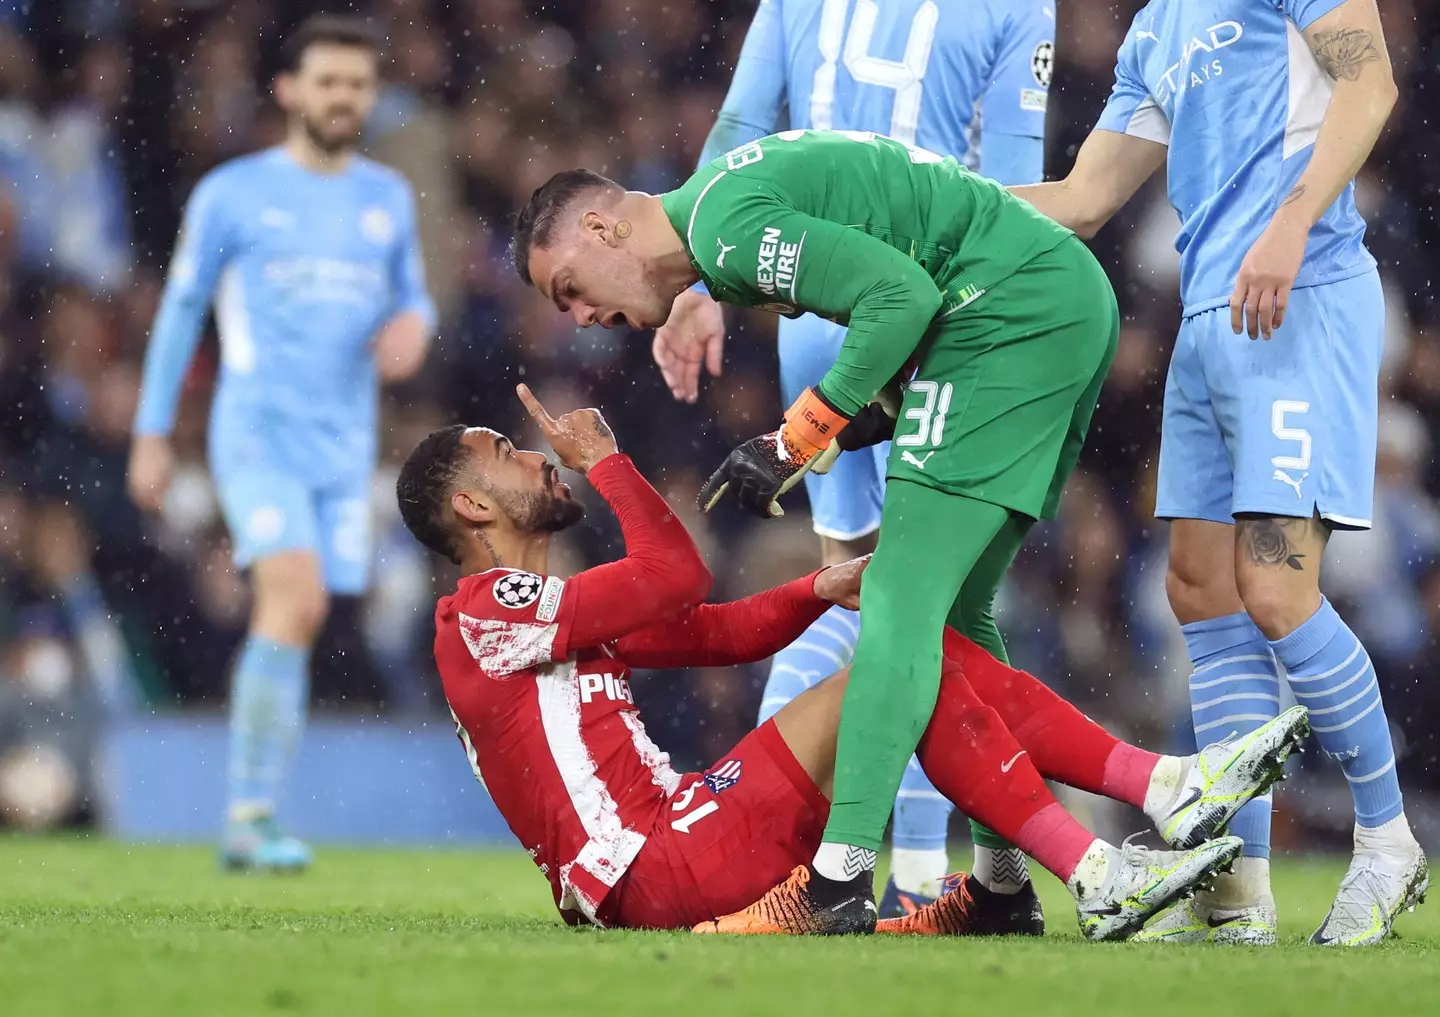 Cunha played against Manchester City in the Champions League last season. Image: Alamy